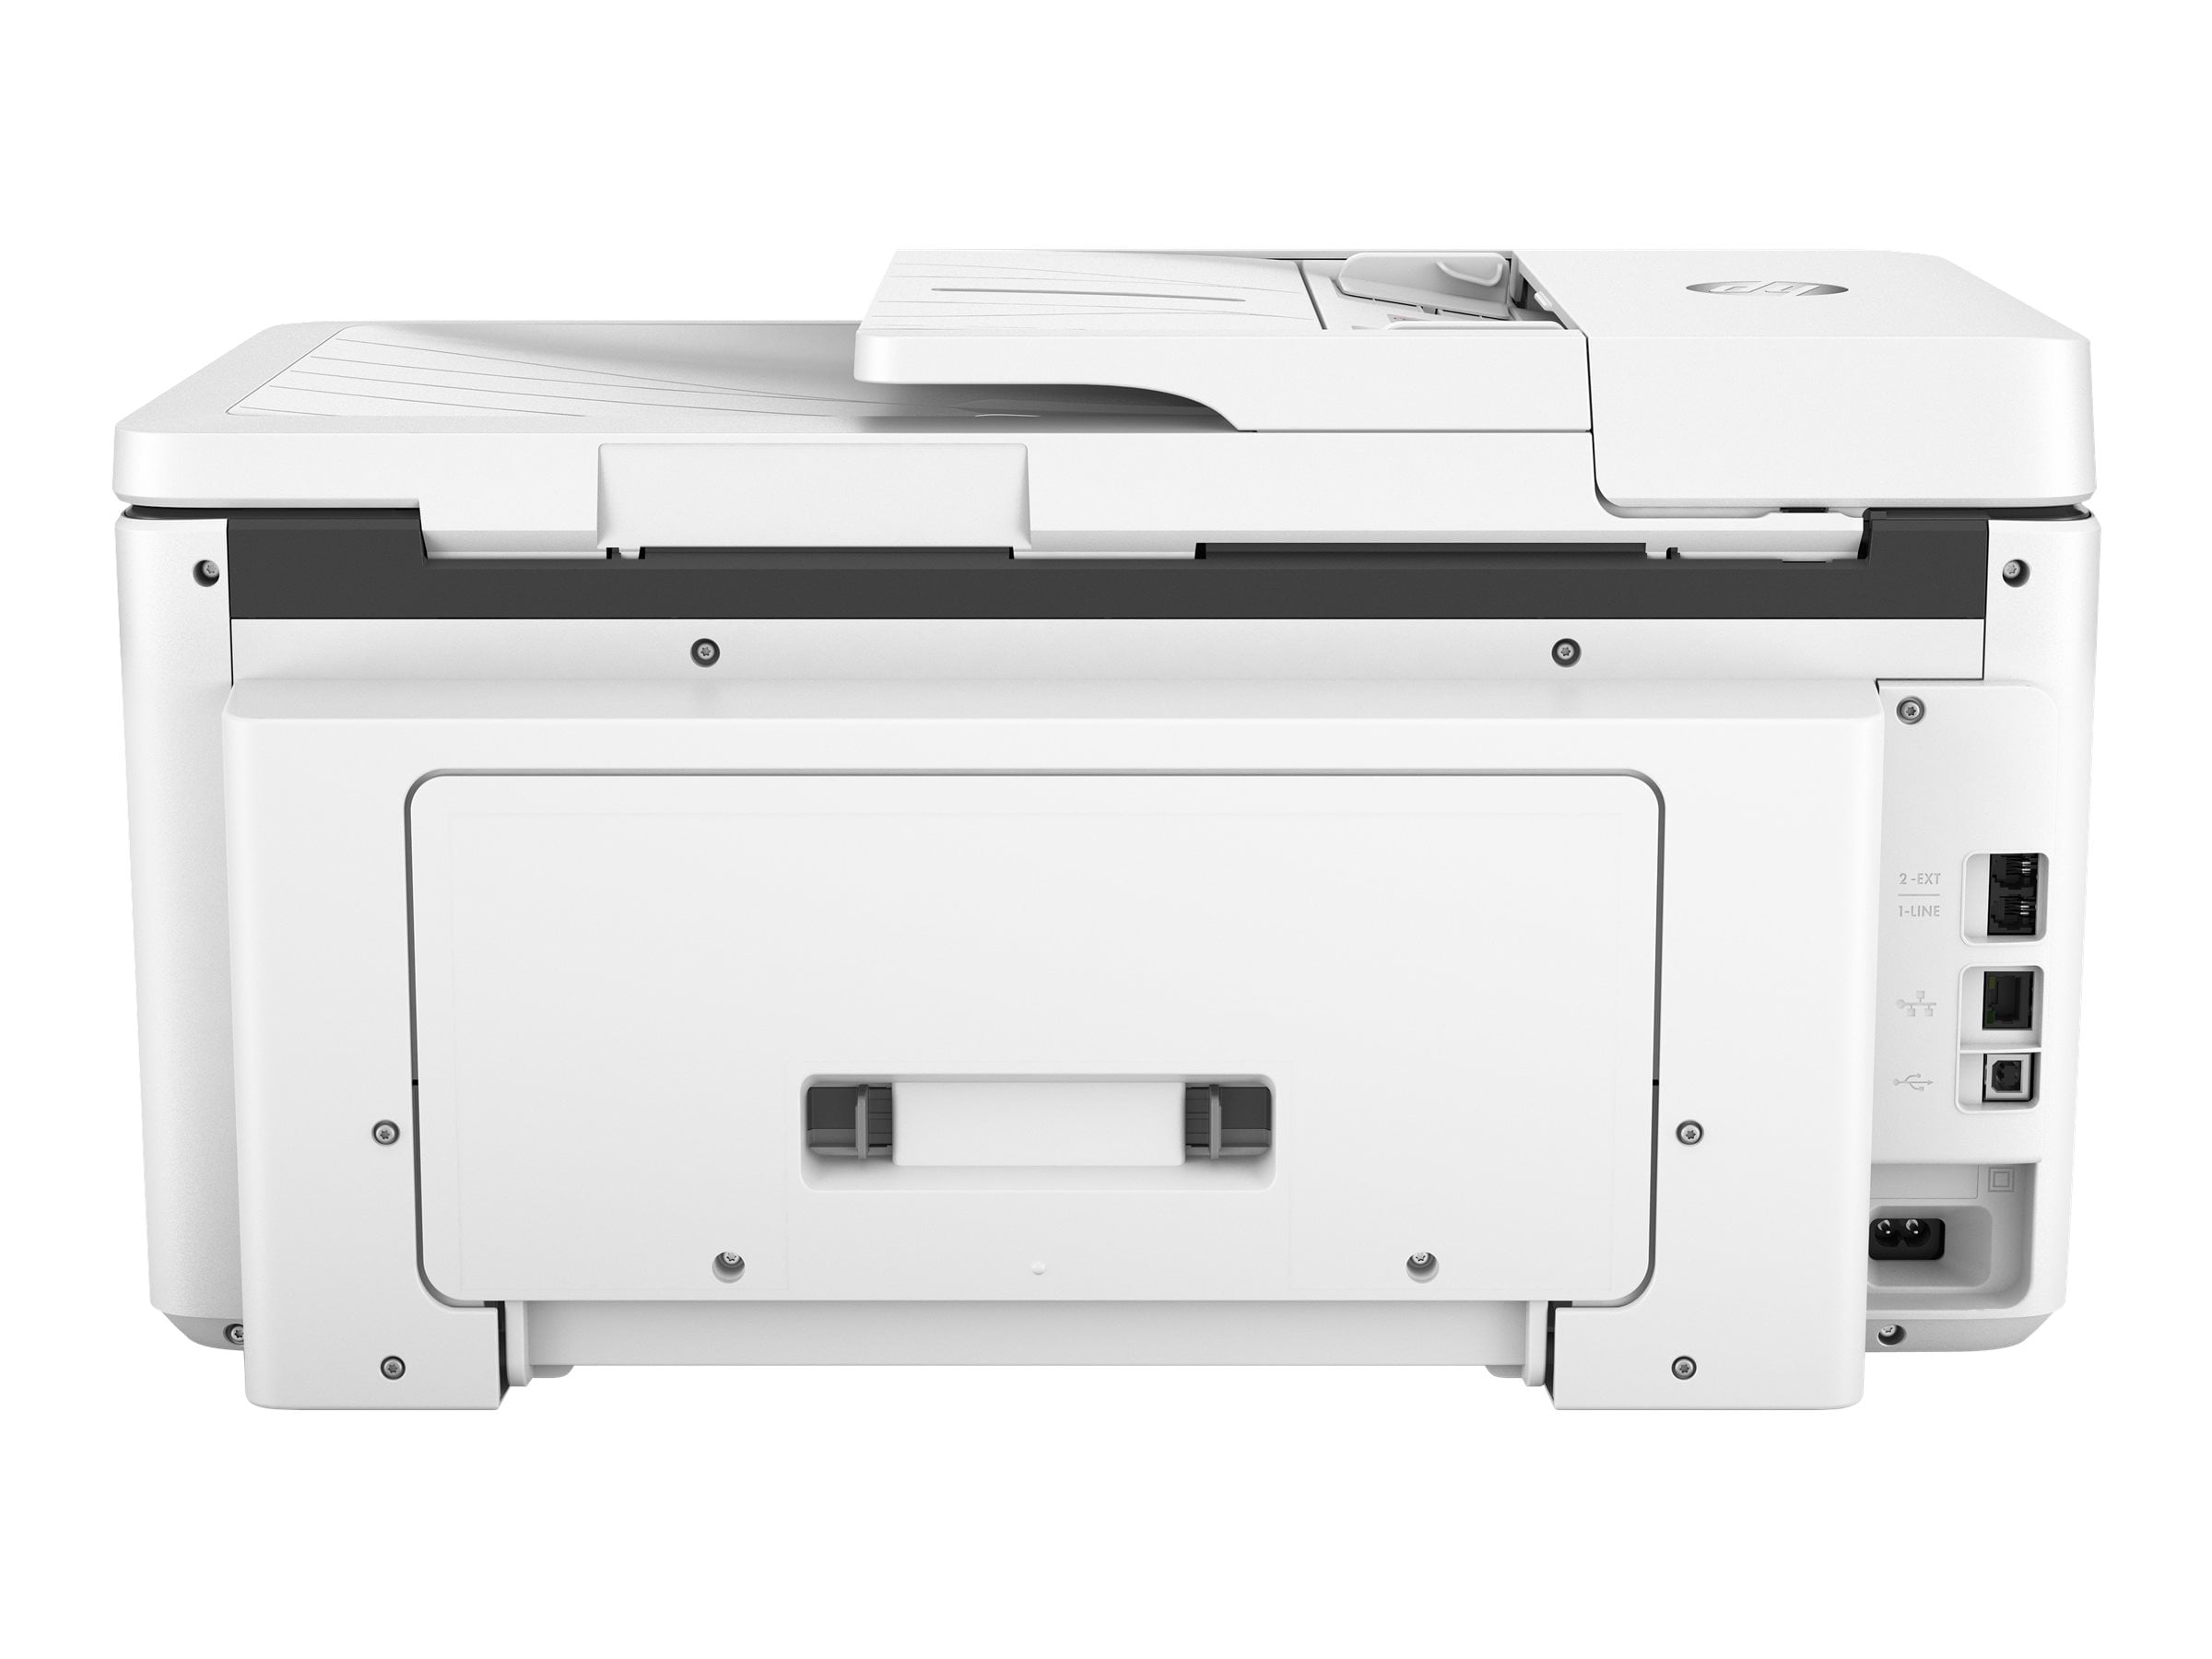 HP Officejet Pro 7720 Wide Format All-in-One - Multifunction printer -  color - ink-jet - 8.5 in x 14 in (original) - A3 (media) - up to 34 ppm  (copying) - up